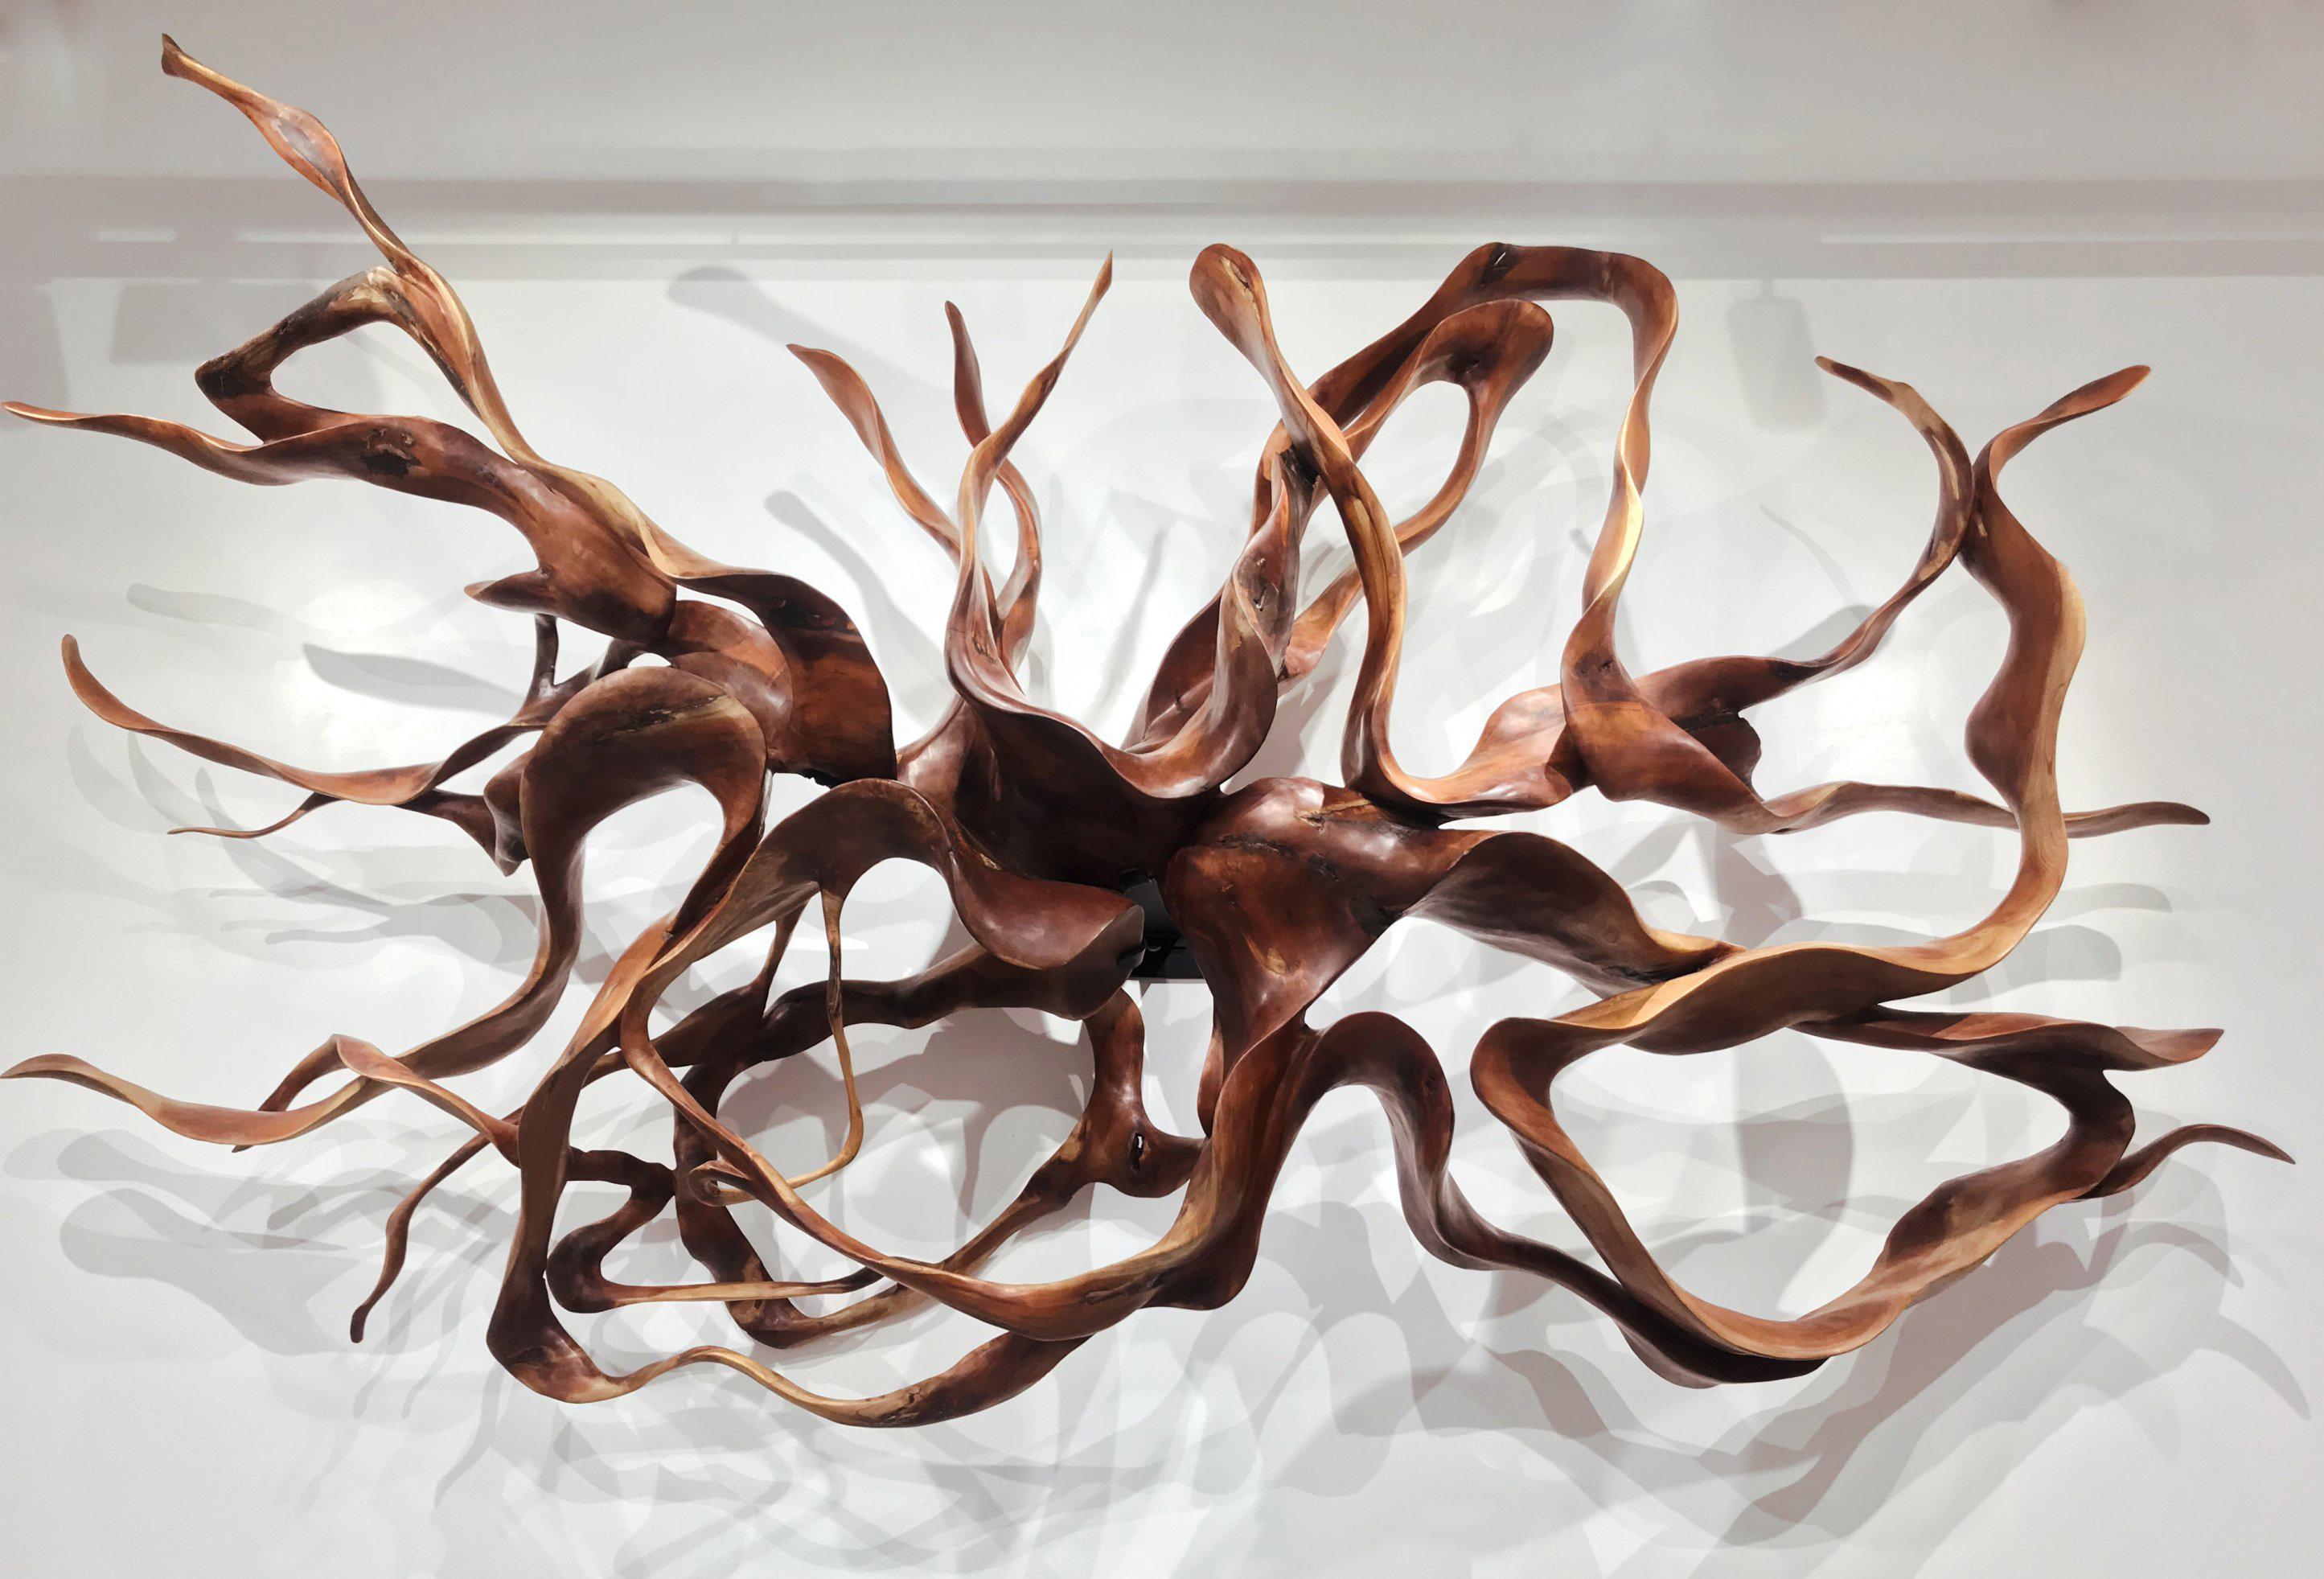 Mahogany wood sculpture, made out of roots.